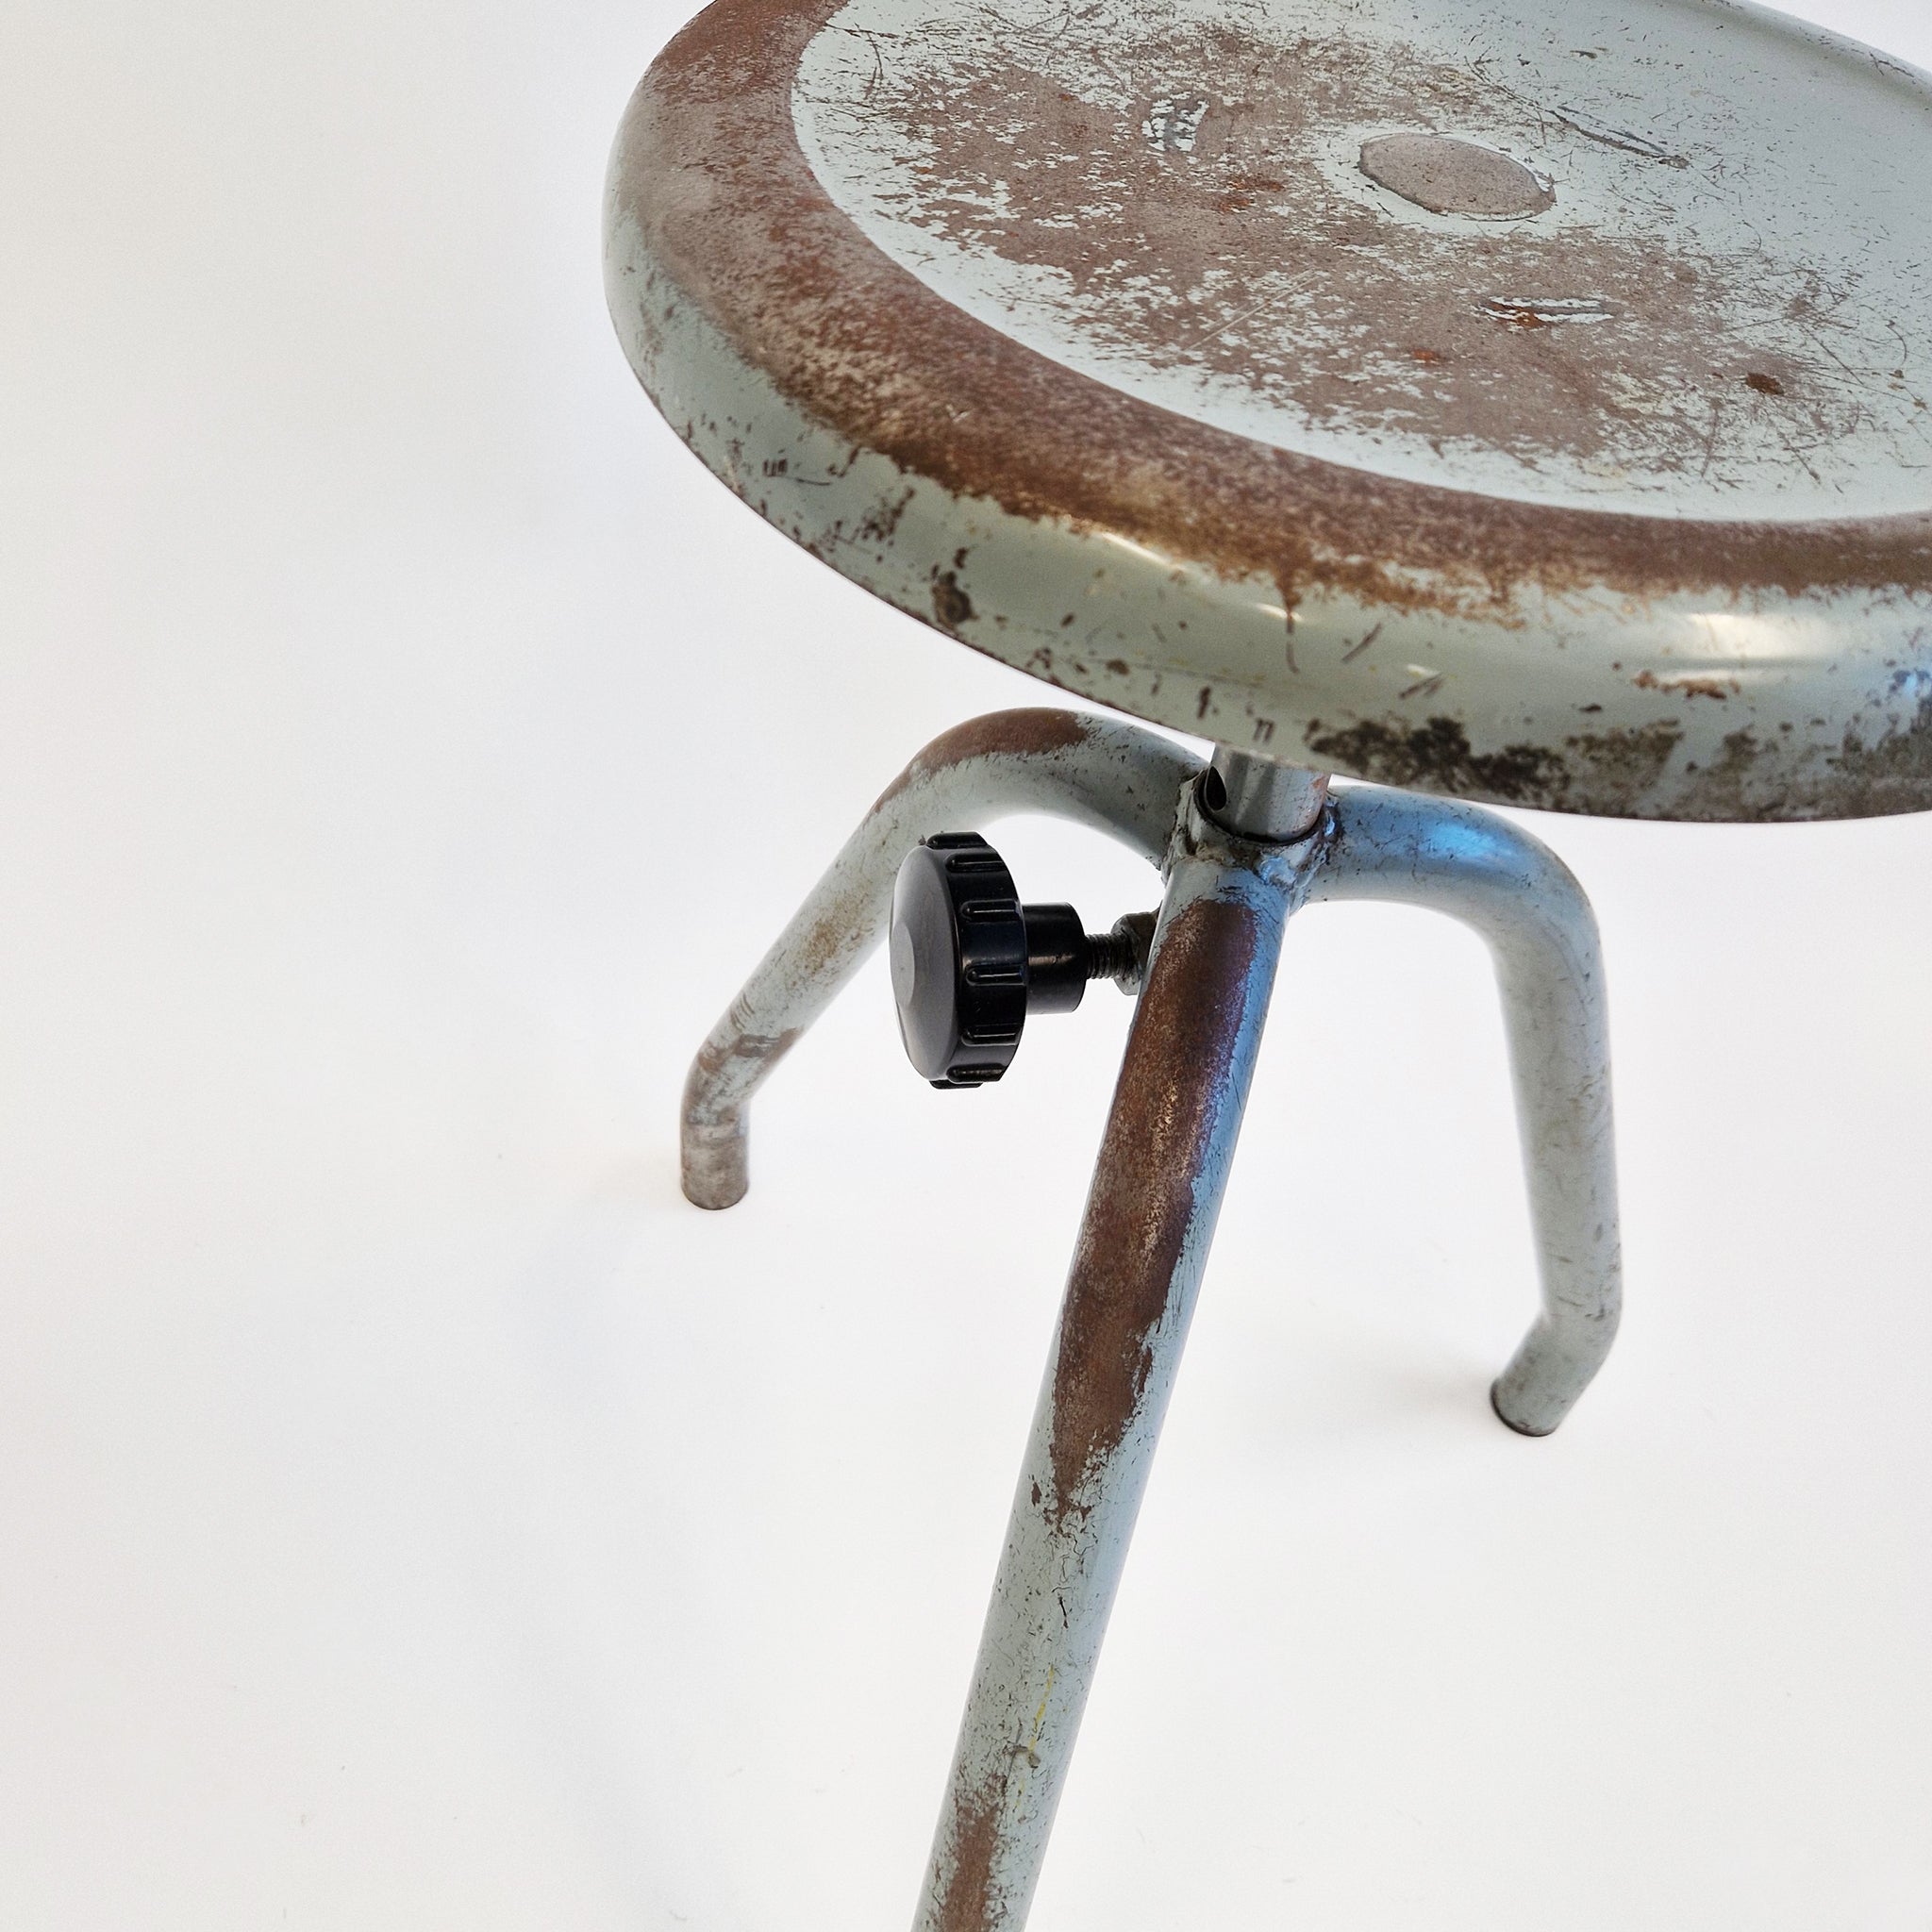 Mid-century Italian industrial metal stools (2 available, sold separately)